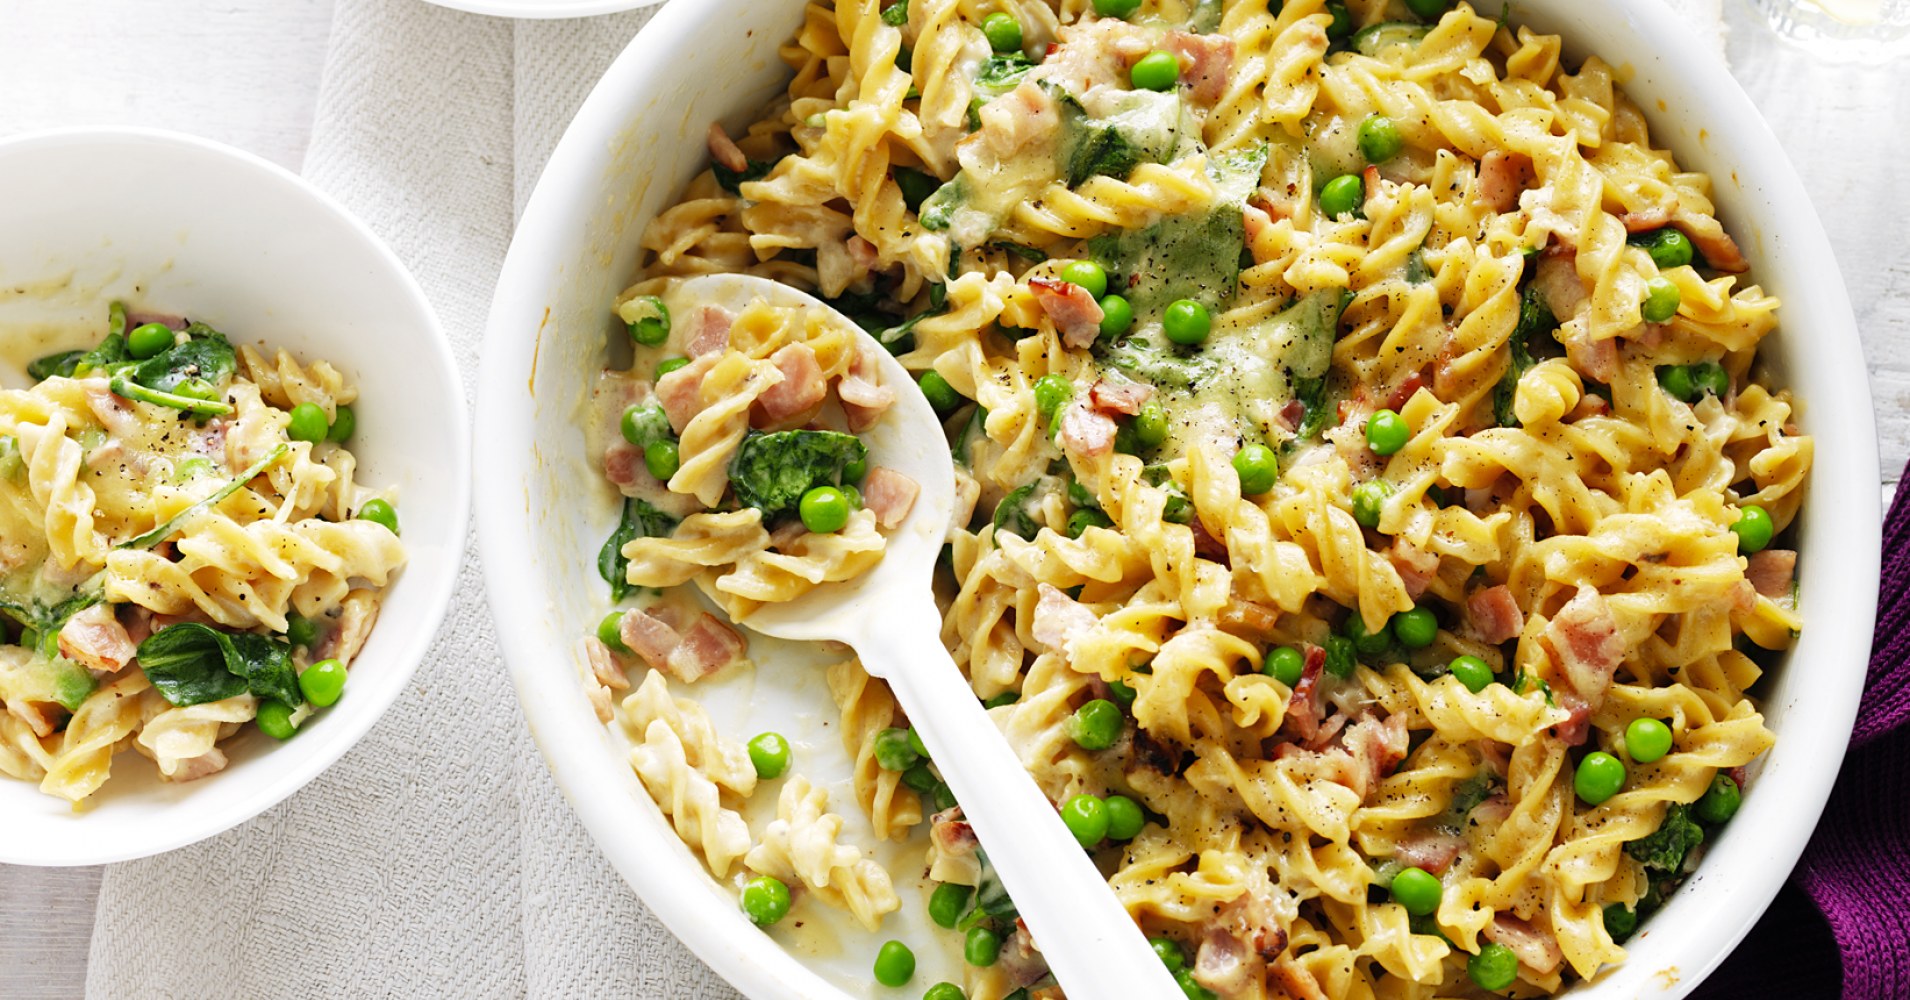 Bacon, Cheese and Spinach Pasta Bake Recipe | myfoodbook